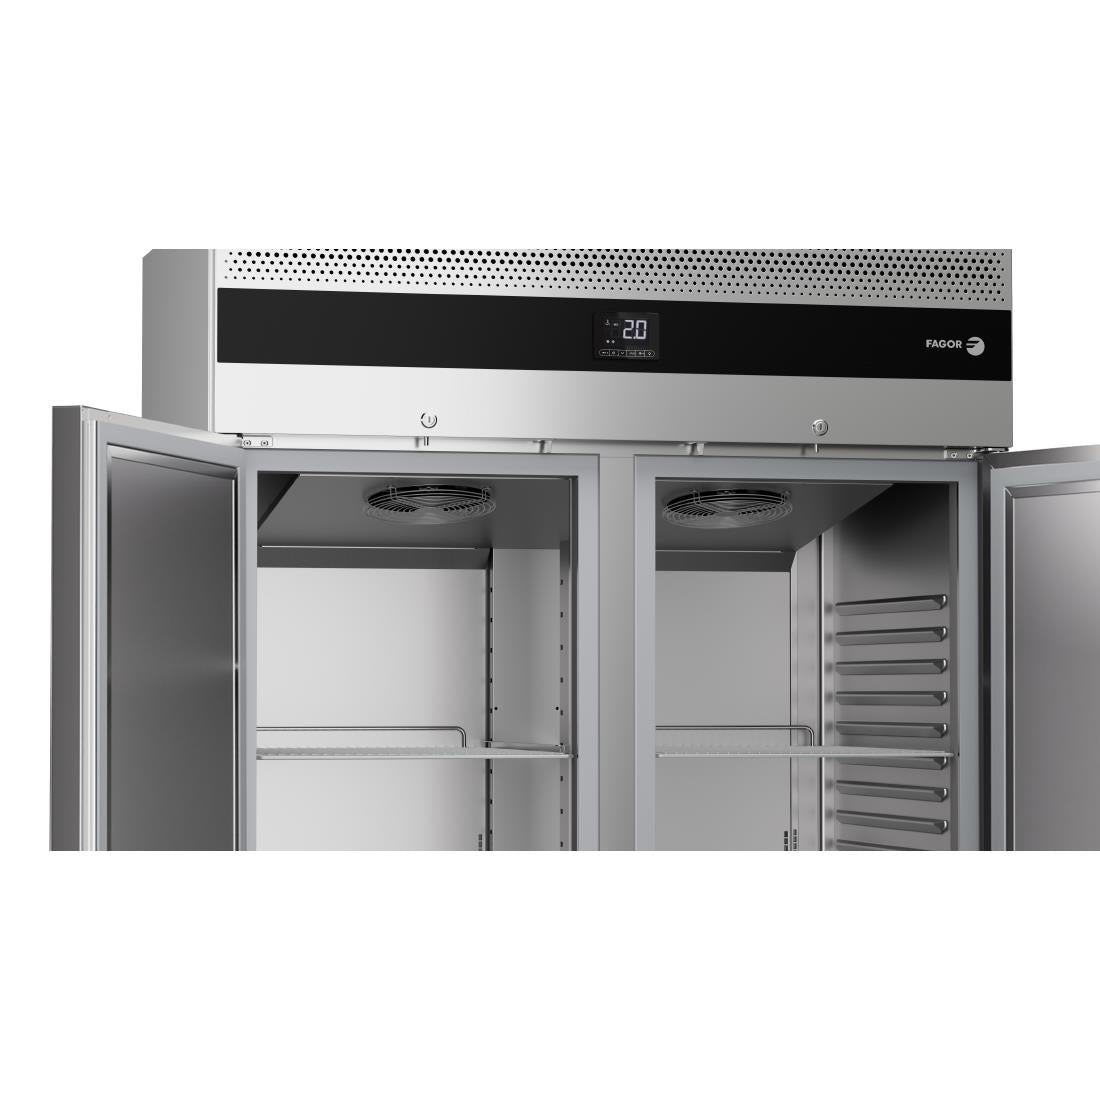 FU002 Fagor Advance Gastronorm Upright Cabinet Fridge 2 Door AUP-22G JD Catering Equipment Solutions Ltd